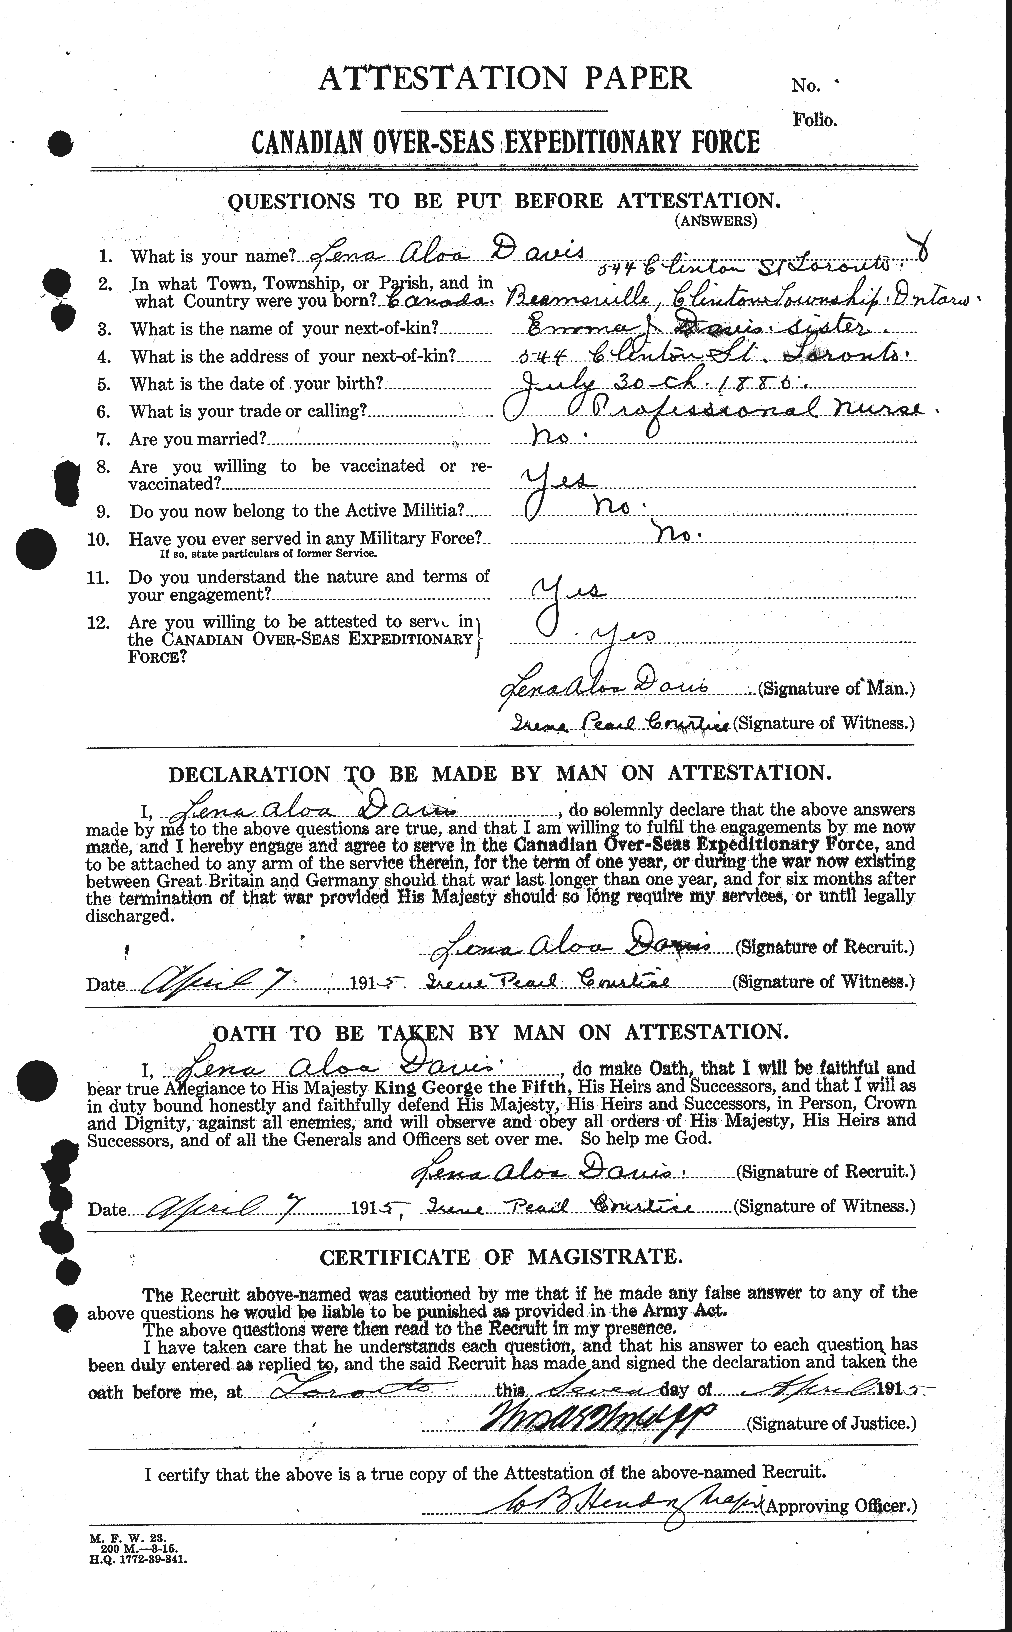 Personnel Records of the First World War - CEF 284147a